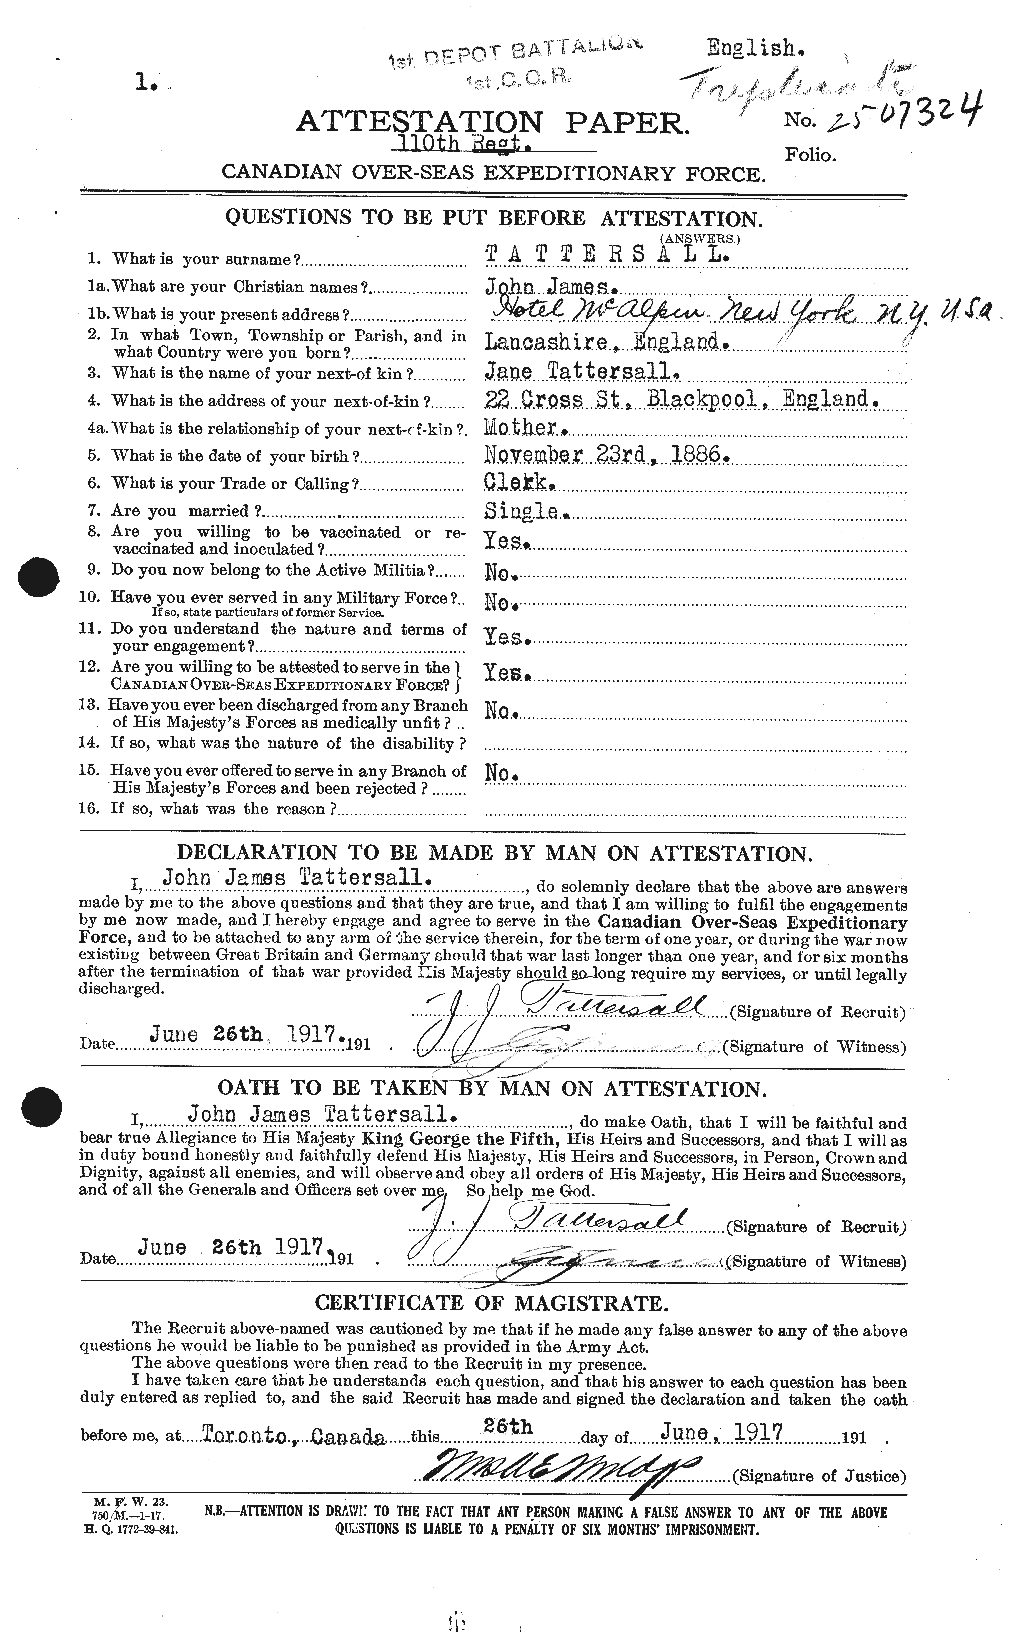 Personnel Records of the First World War - CEF 625975a